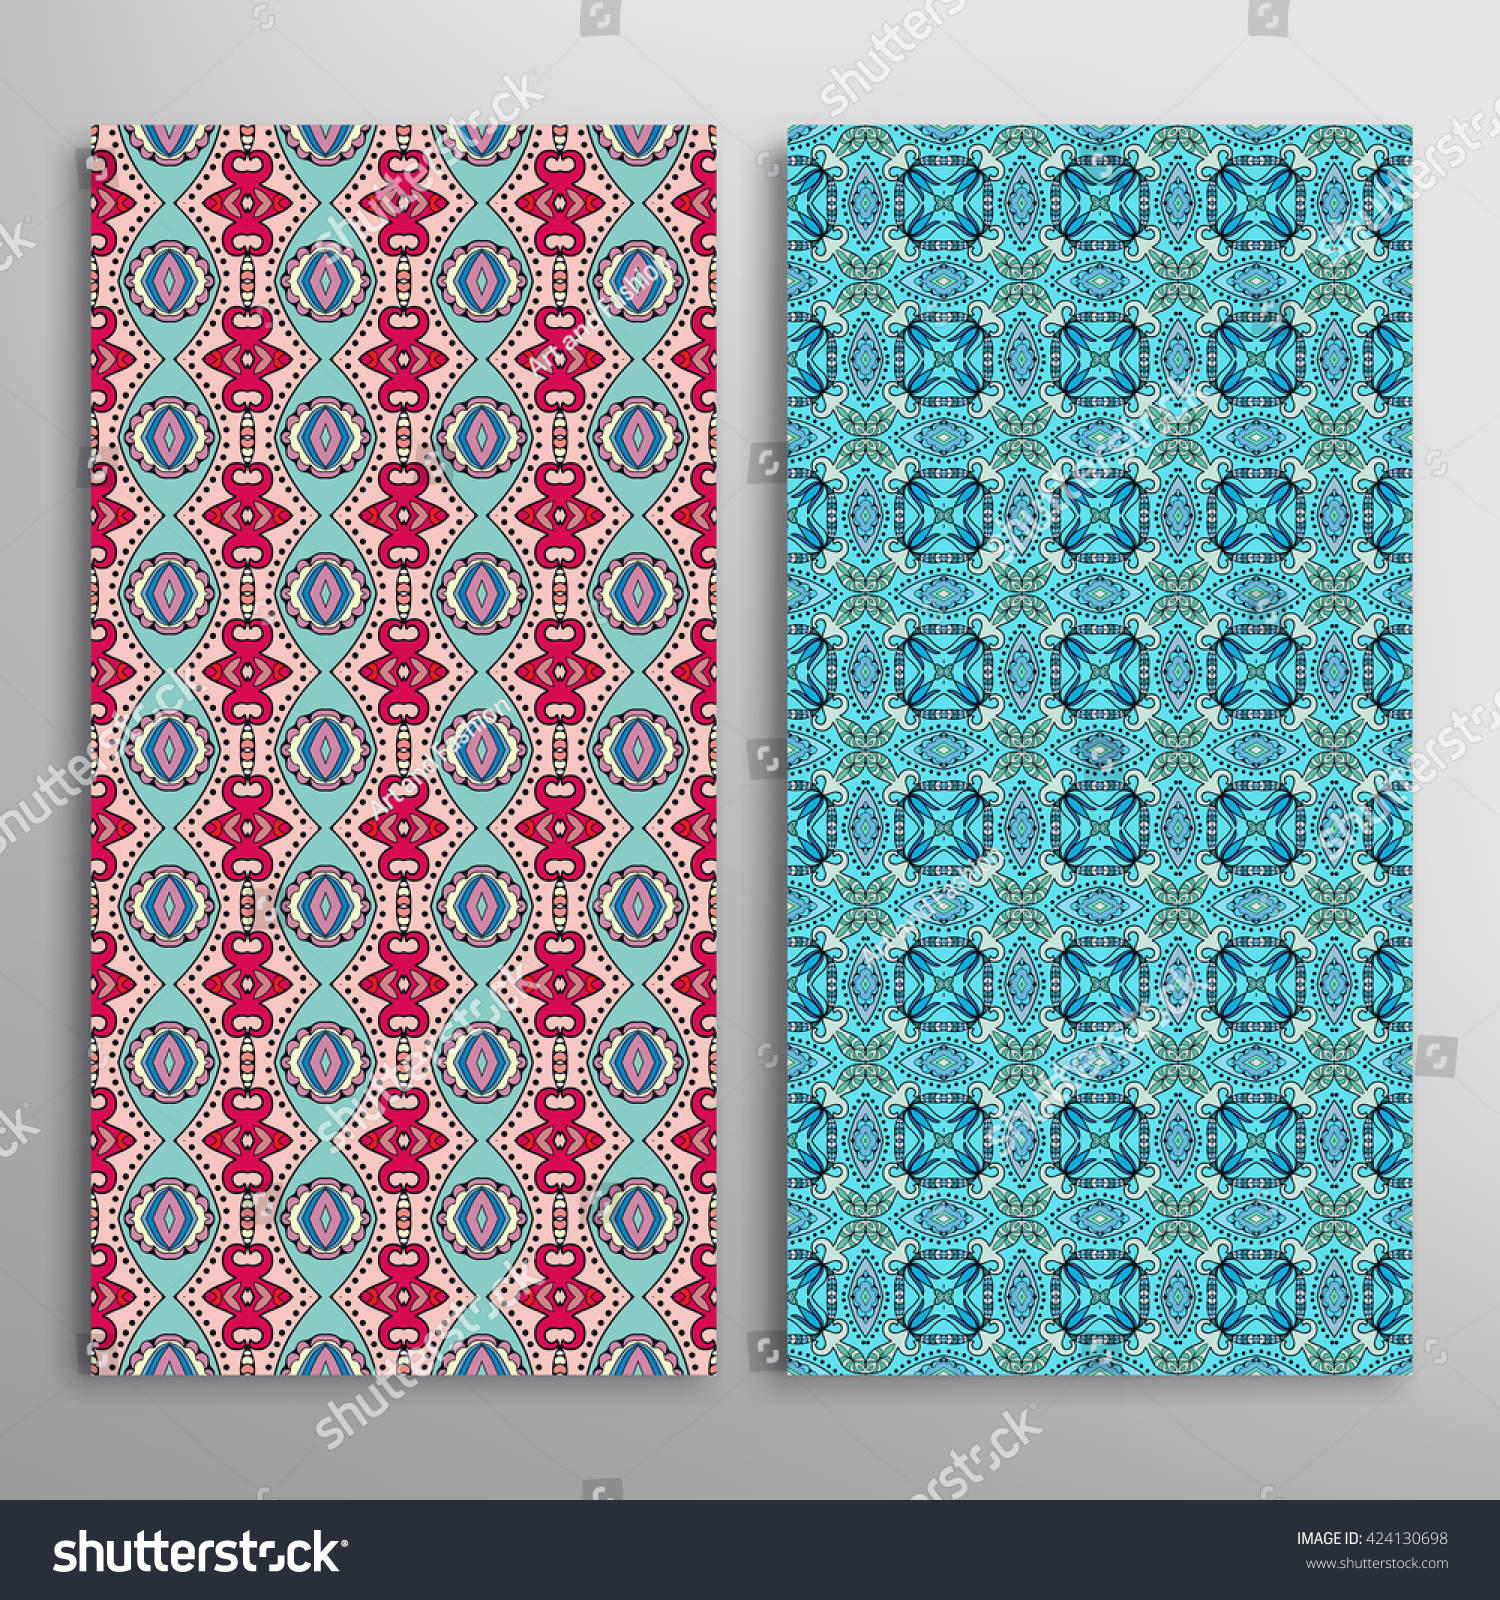 Vertical seamless patterns set, floral geometric lace texture for Wedding, Bridal, Valentine's day, greeting cards or Birthday Invitations. Decorative seamless backgrounds, tribal ethnic ornament #424130698